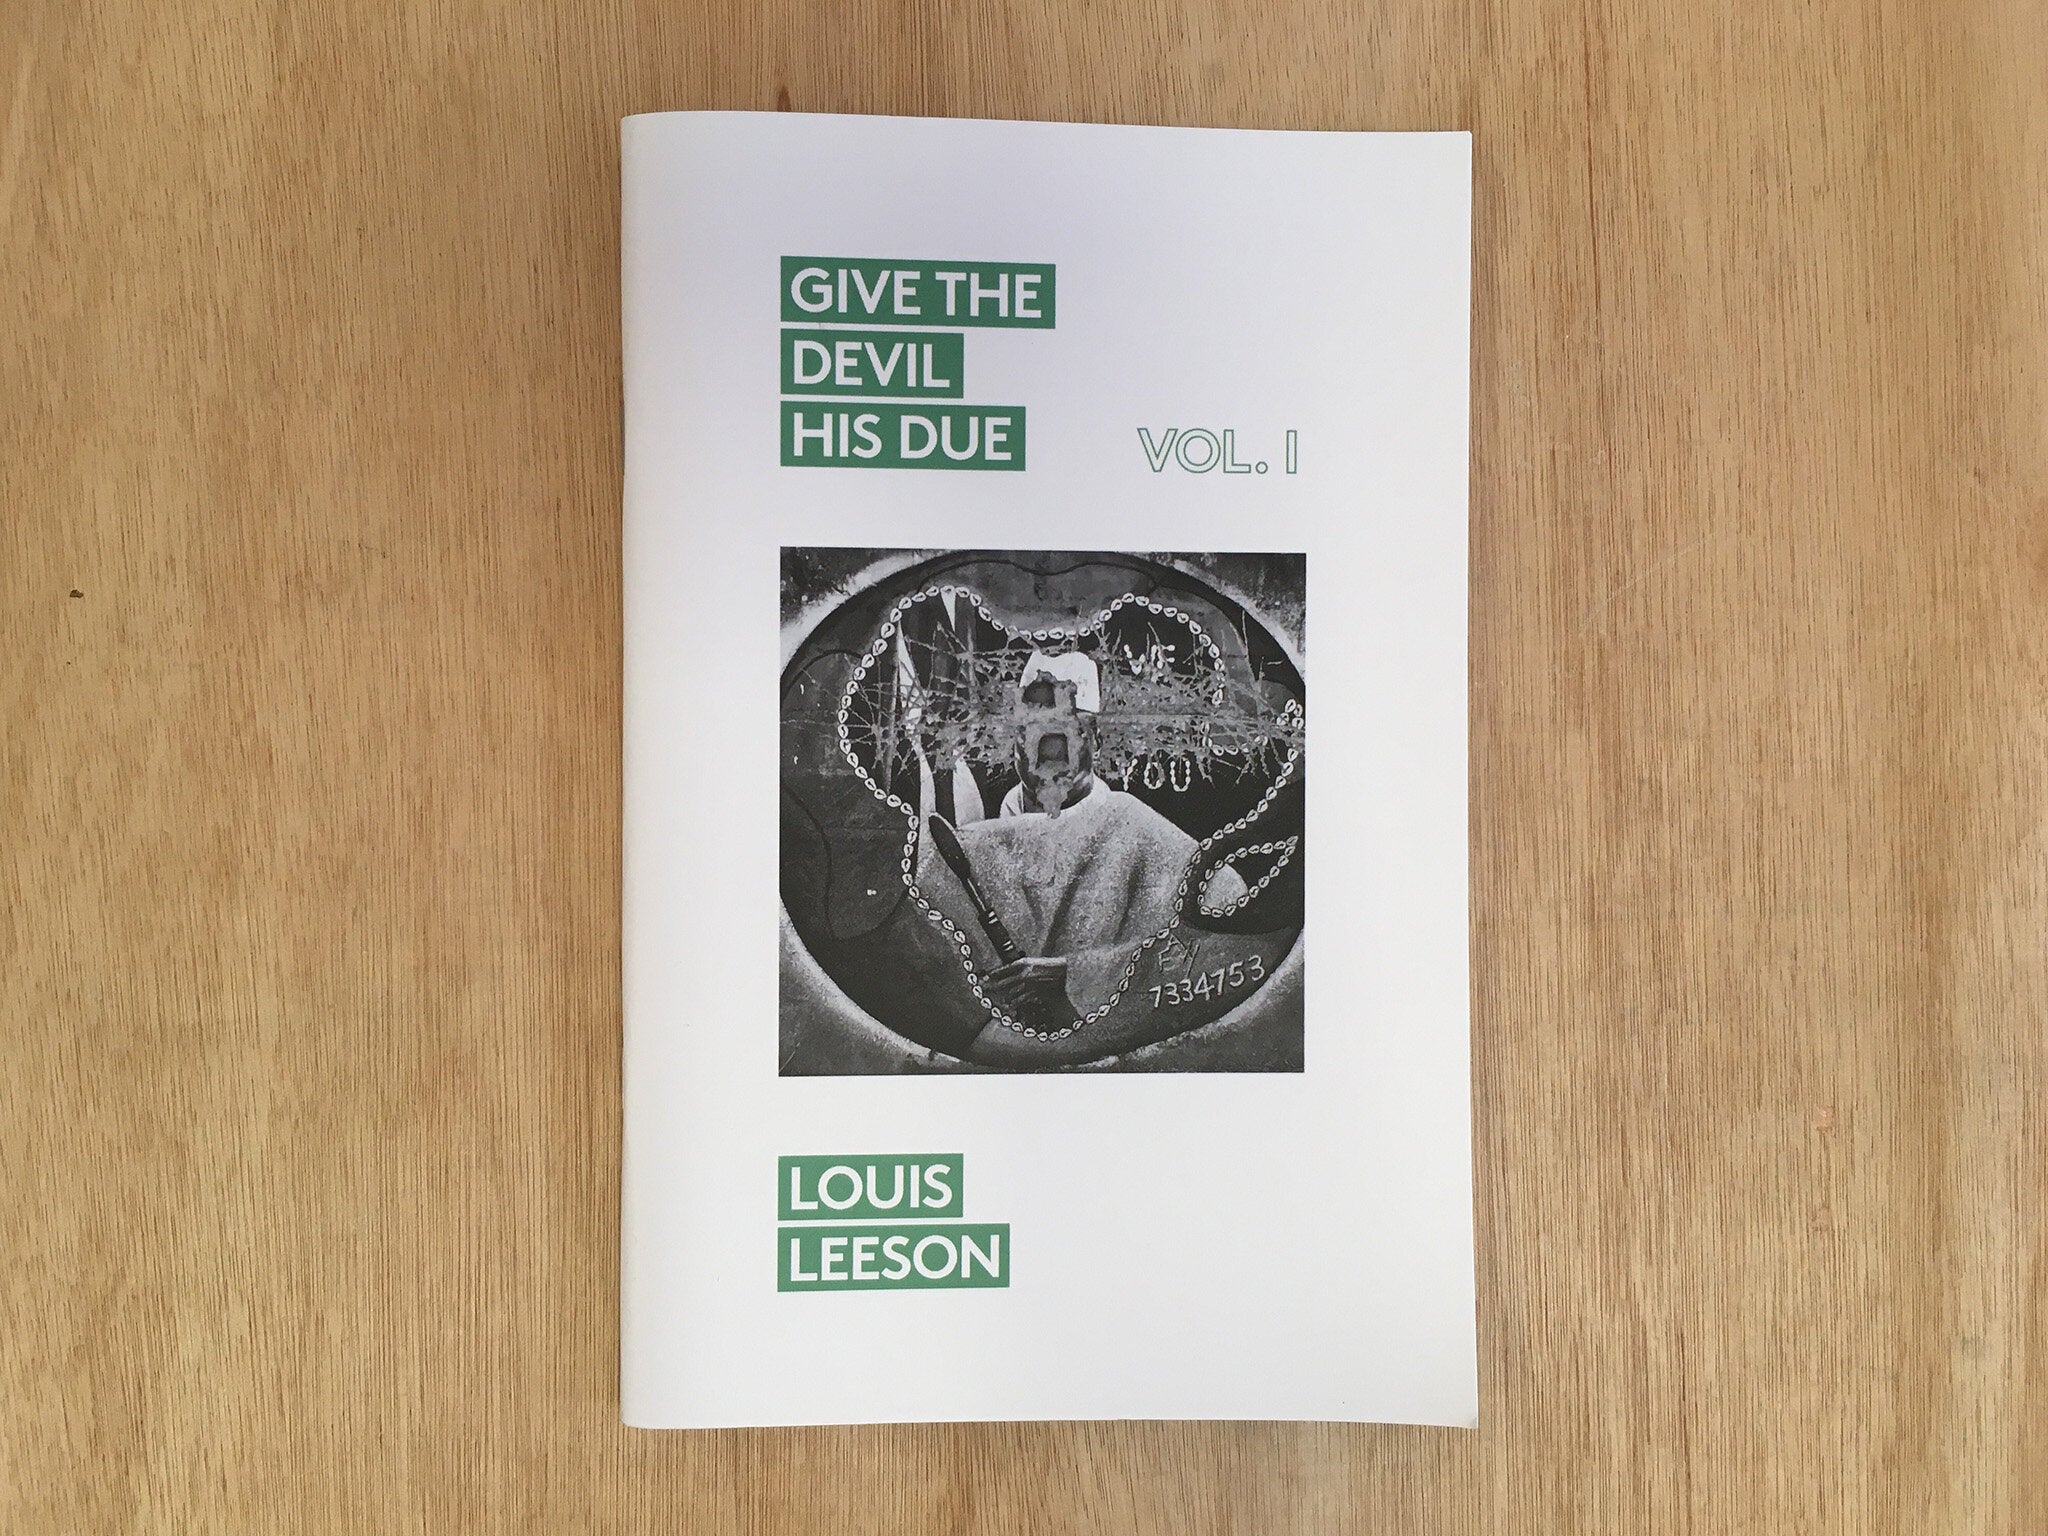 GIVE THE DEVIL HIS DUE by Louis Leeson